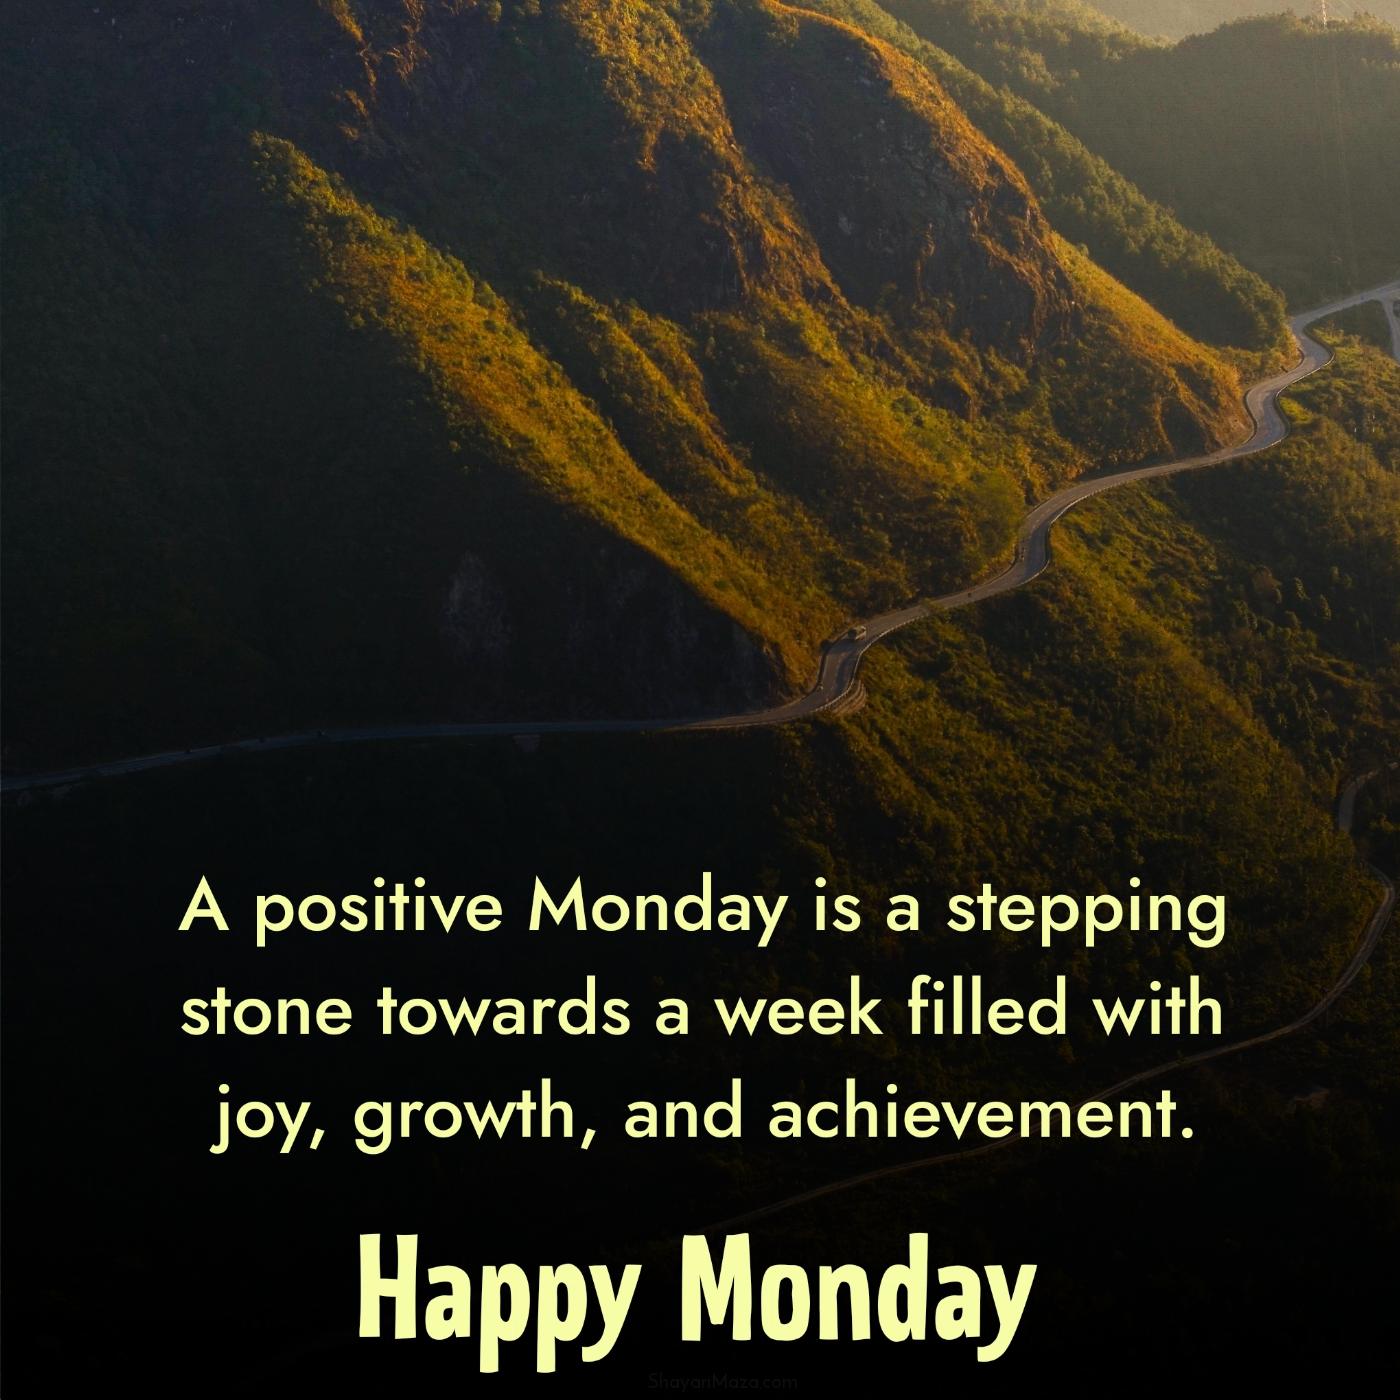 A positive Monday is a stepping stone towards a week